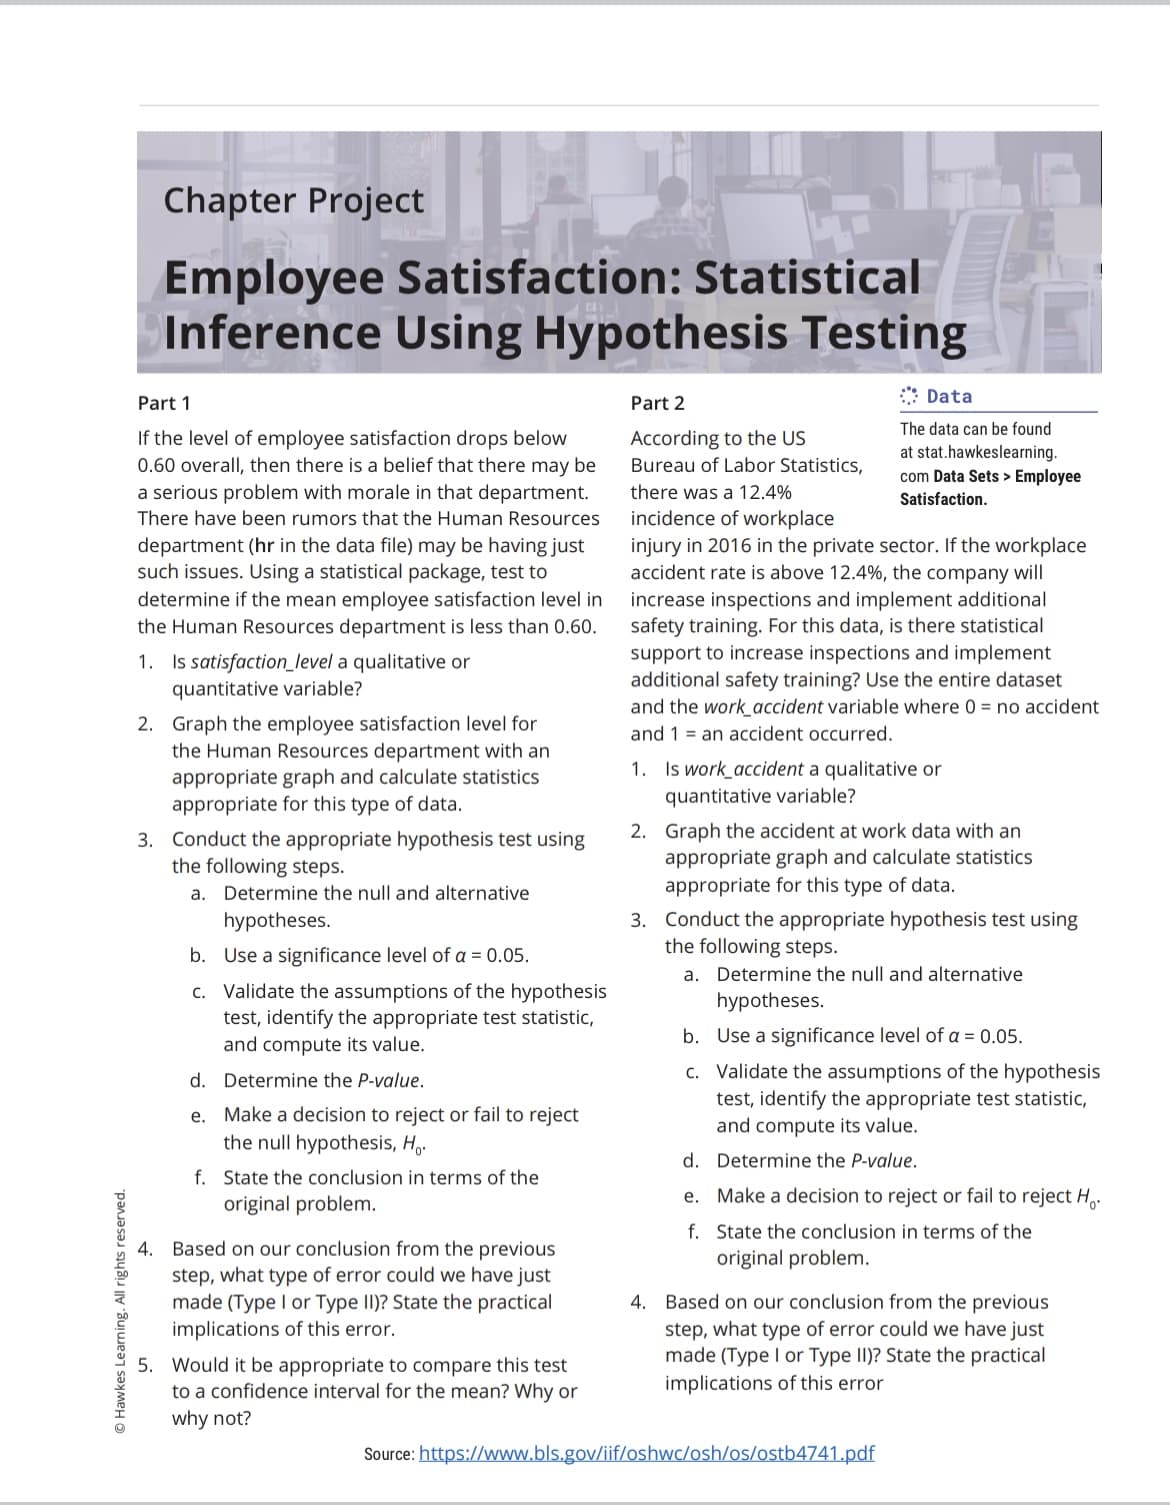 Chapter Project
Employee Satisfaction: Statistical
Inference Using Hypothesis Testing
:: Data
Part 1
Part 2
The data can be found
If the level of employee satisfaction drops below
0.60 overall, then there is a belief that there may be
According to the US
Bureau of Labor Statistics,
at stat.hawkeslearning.
com Data Sets > Employee
a serious problem with morale in that department.
there was a 12.4%
Satisfaction.
incidence of workplace
injury in 2016 in the private sector. If the workplace
accident rate is above 12.4%, the company will
There have been rumors that the Human Resources
department (hr in the data file) may be having just
such issues. Using a statistical package, test to
determine if the mean employee satisfaction level in
the Human Resources department is less than 0.60.
increase inspections and implement additional
safety training. For this data, is there statistical
support to increase inspections and implement
additional safety training? Use the entire dataset
and the work accident variable where 0 = no accident
and 1 = an accident occurred.
1. Is satisfaction_level a qualitative or
quantitative variable?
2. Graph the employee satisfaction level for
the Human Resources department with an
appropriate graph and calculate statistics
appropriate for this type of data.
1. Is work accident a qualitative or
quantitative variable?
3. Conduct the appropriate hypothesis test using
the following steps.
2. Graph the accident at work data with an
appropriate graph and calculate statistics
appropriate for this type of data.
a. Determine the null and alternative
3. Conduct the appropriate hypothesis test using
the following steps.
hypotheses.
b. Use a significance level of a = 0.05.
a. Determine the null and alternative
c. Validate the assumptions of the hypothesis
test, identify the appropriate test statistic,
and compute its value.
hypotheses.
b. Use a significance level of a = 0.05.
c. Validate the assumptions of the hypothesis
test, identify the appropriate test statistic,
and compute its value.
d. Determine the P-value.
e. Make a decision to reject or fail to reject
the null hypothesis, H..
d. Determine the P-value.
f. State the conclusion in terms of the
original problem.
e. Make a decision to reject or fail to reject H,
f. State the conclusion in terms of the
original problem.
4. Based on our conclusion from the previous
step, what type of error could we have just
made (Type I or Type II)? State the practical
implications of this error.
4. Based on our conclusion from the previous
step, what type of error could we have just
made (Type I or Type II)? State the practical
implications of this error
5. Would it be appropriate to compare this test
to a confidence interval for the mean? Why or
why not?
Source: https://www.bls.gov/iif/oshwc/osh/os/ostb4741.pdf
OHawkes Learning. All rights reserved.
